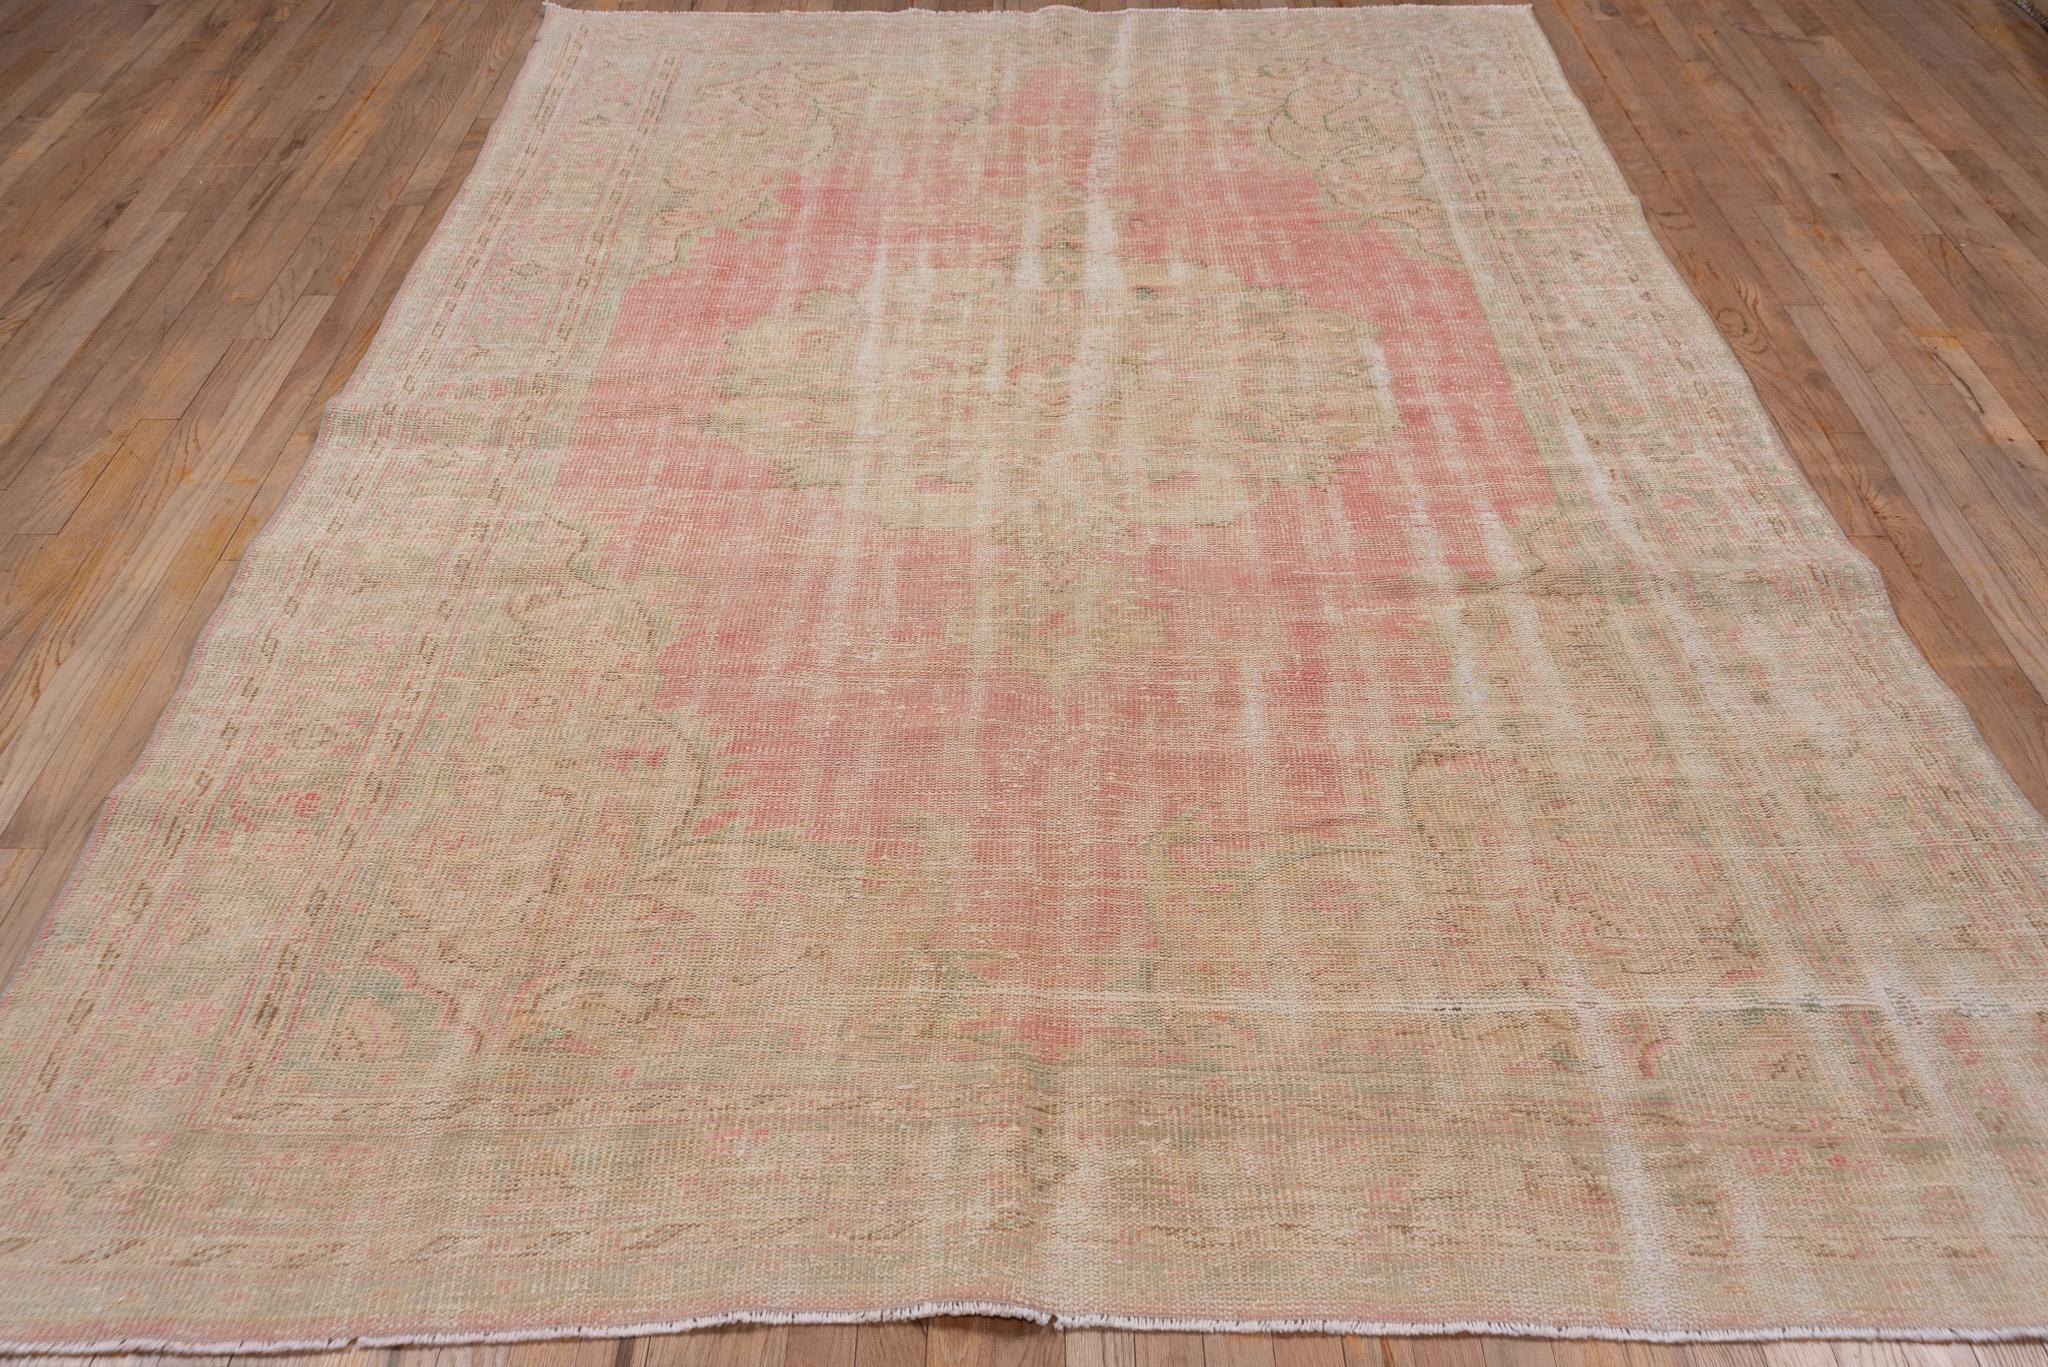 Trend Contemporary Brown Red Black Antique Rug im Zustand „Gut“ im Angebot in New York, NY